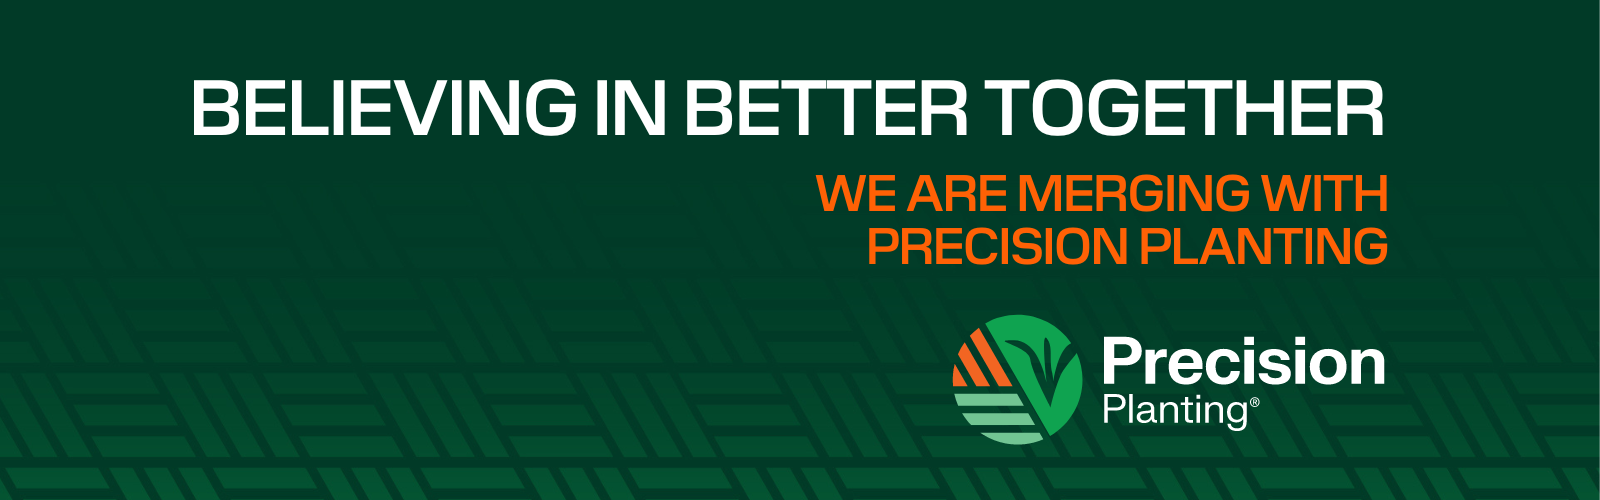 Believing in Better Together: Headsight is merging with Precision Planting